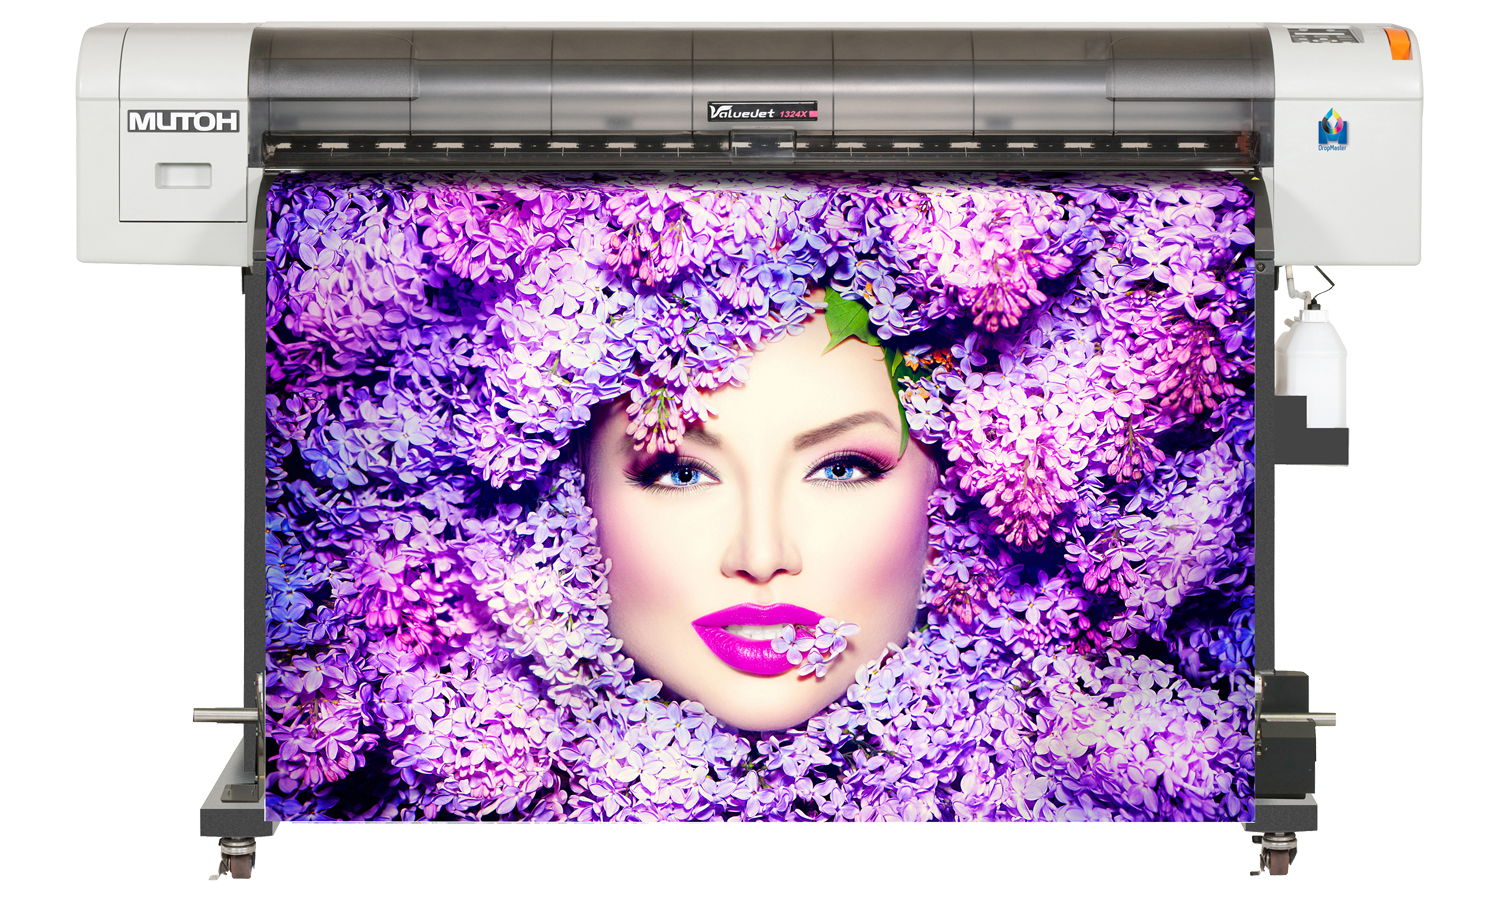 Mutoh 1324x 54" Printer -  CALL FOR CURRENT SPECIAL PRICING